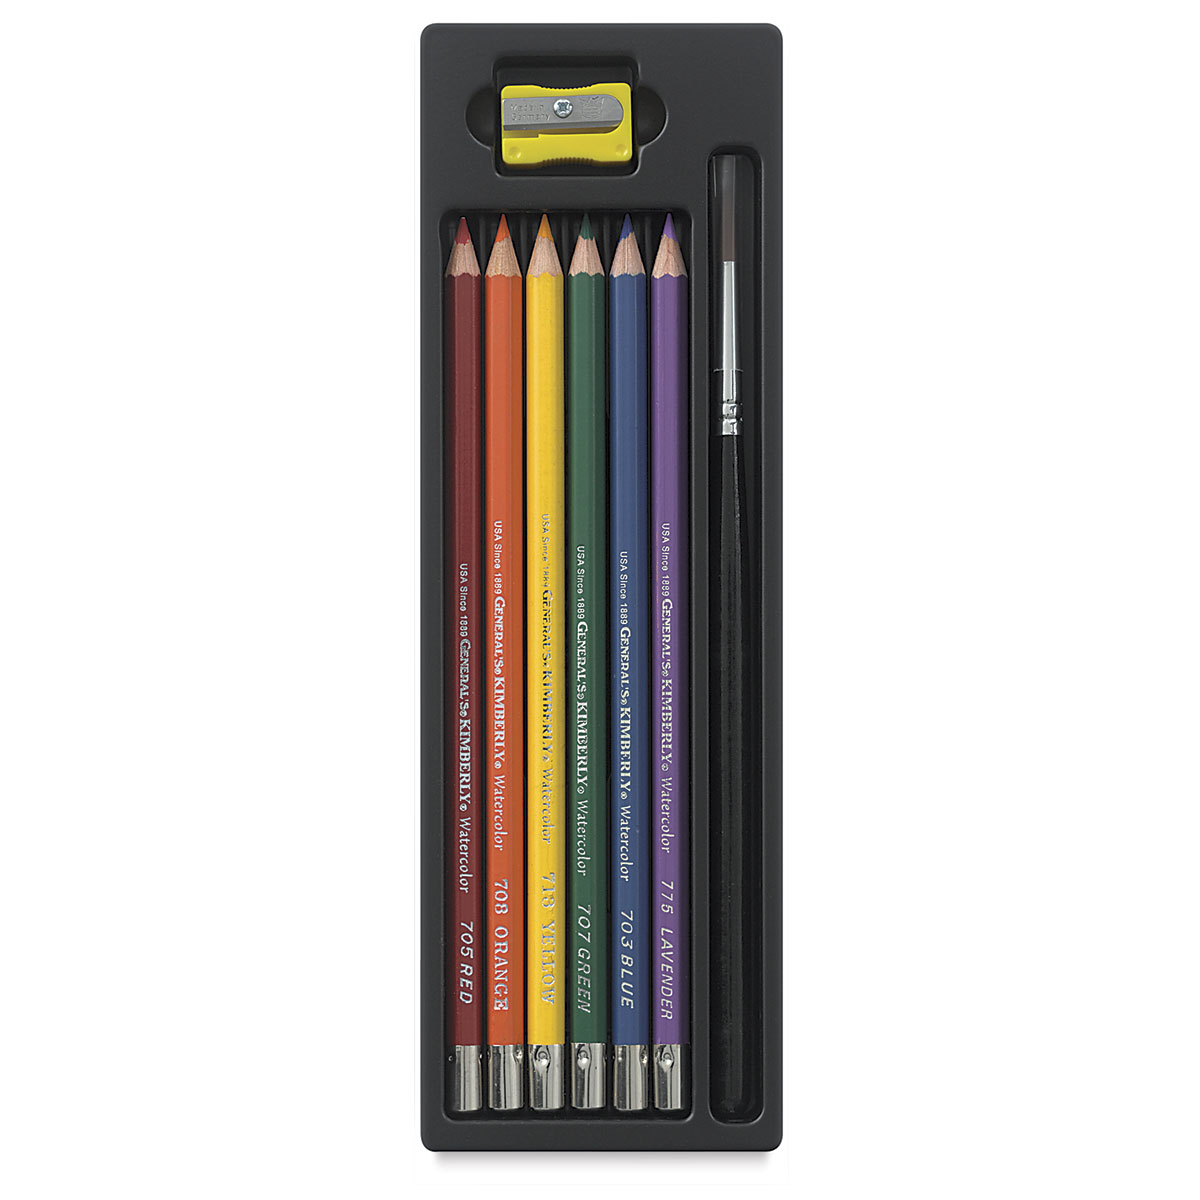 General's Kimberly Watercolor Pencil Set - Assorted Colors, Classroom Pack,  Set of 144